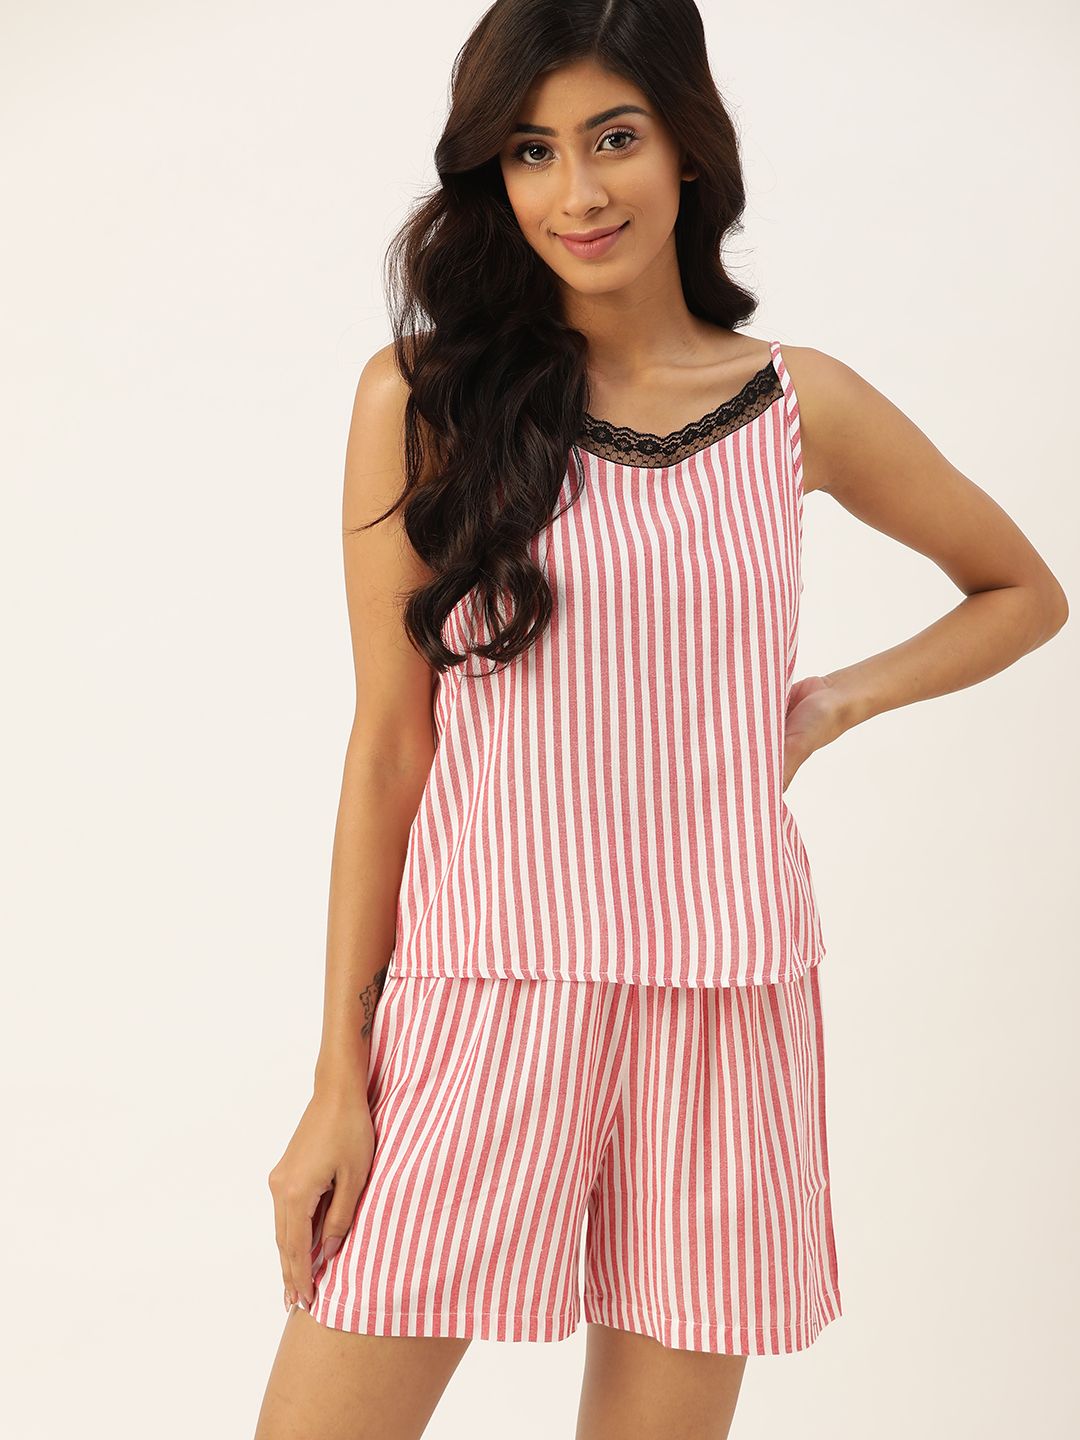 ETC Women Red & White Striped Shorts Set Price in India